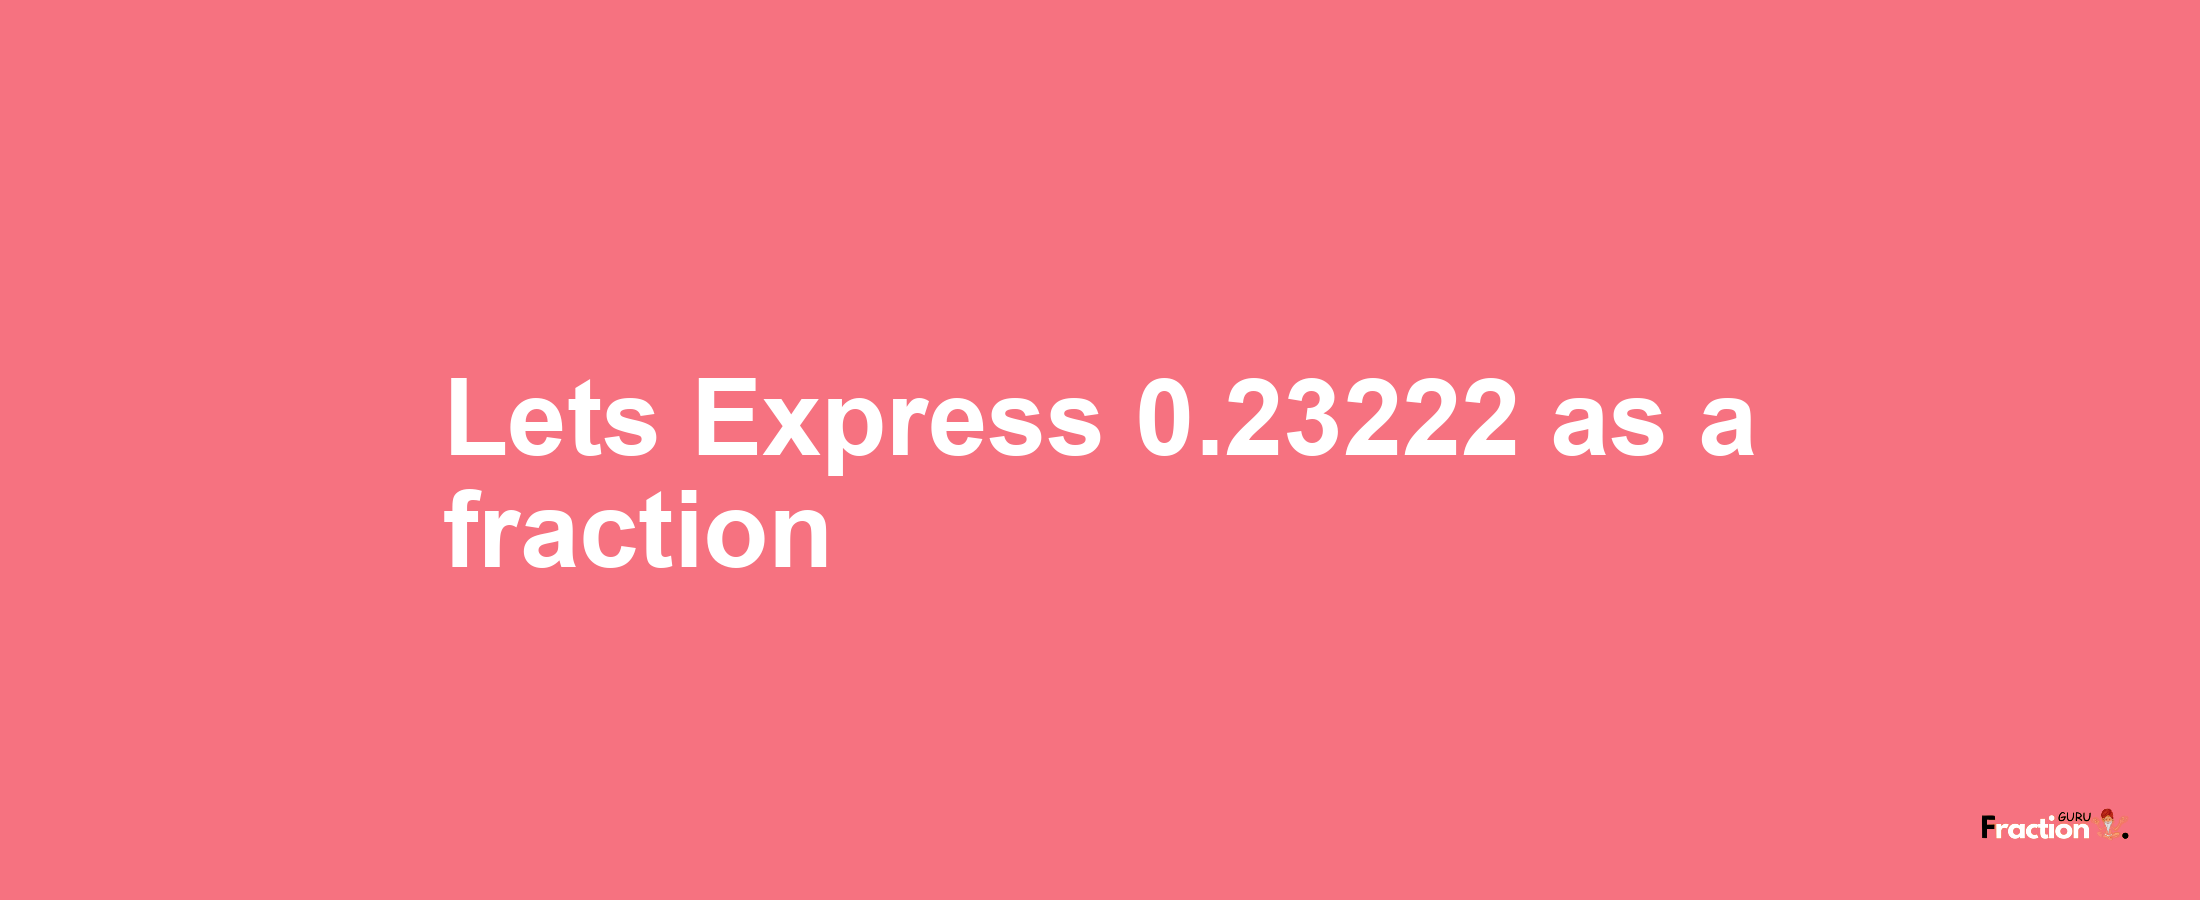 Lets Express 0.23222 as afraction